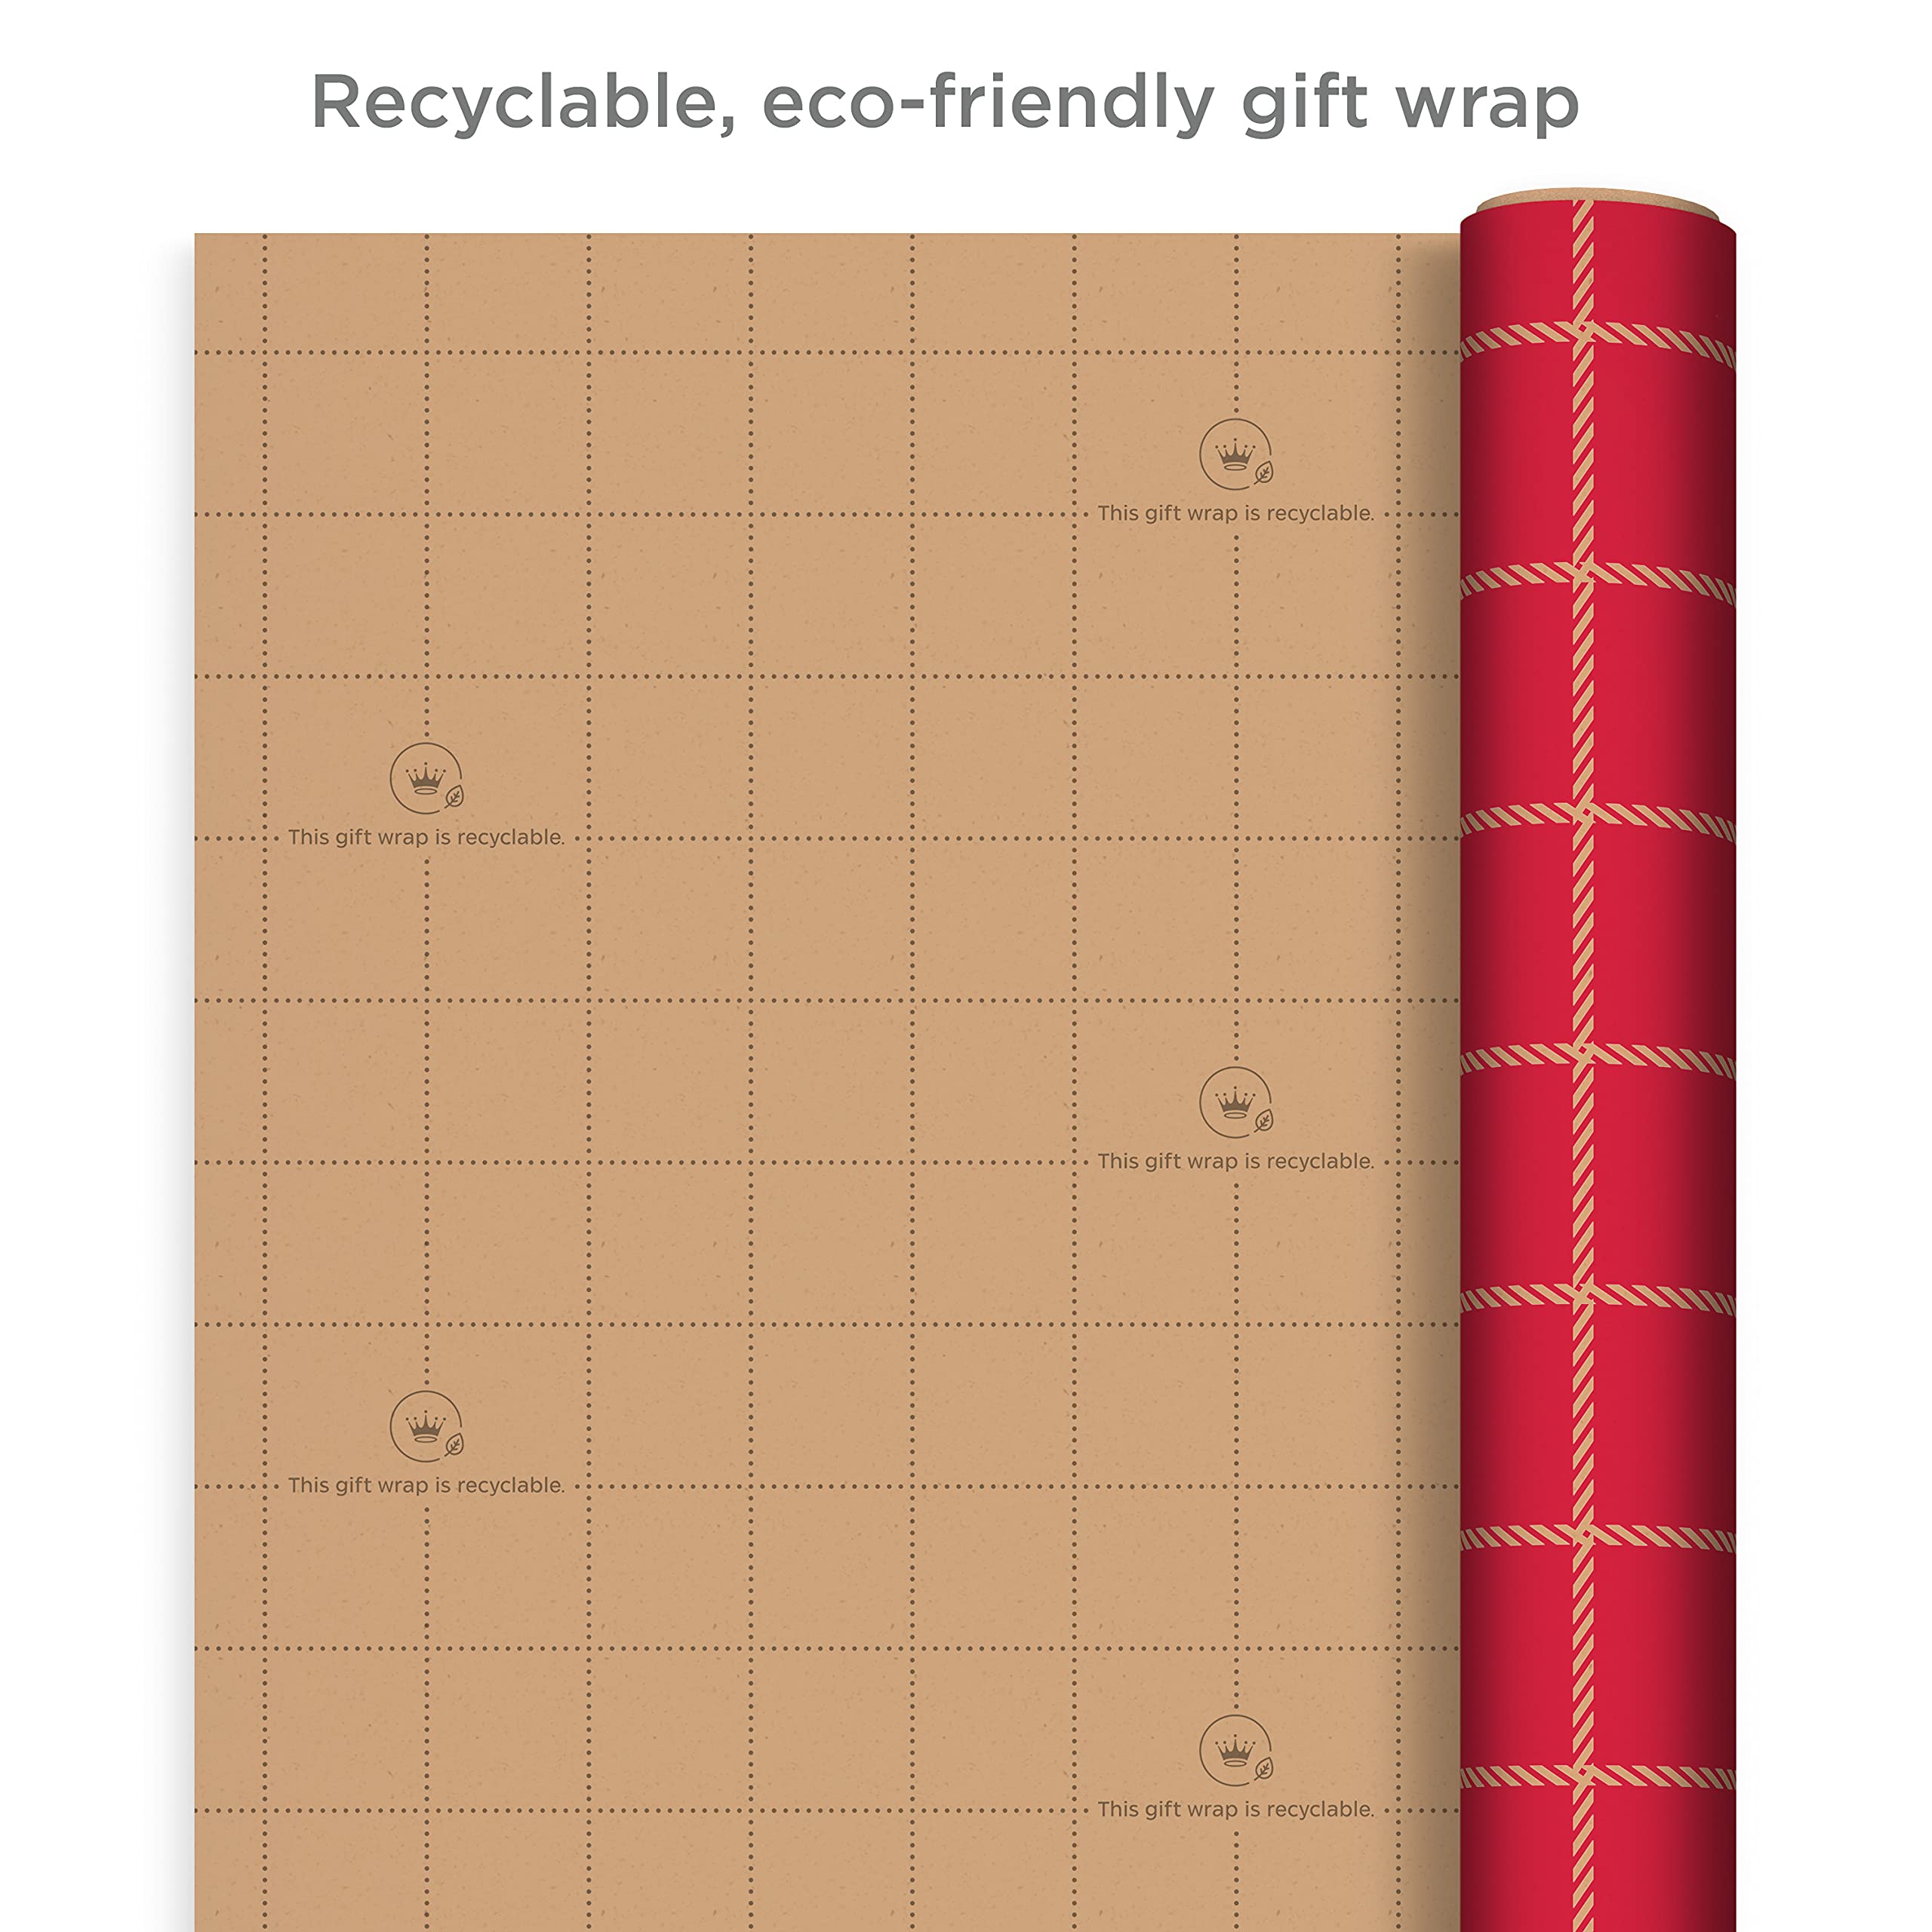 Hallmark Recyclable Wrapping Paper with Cutlines on Reverse (6 Rolls: 120 Square Feet Total) Red Grid, Blue Chevron, Rainbow Stars, Celebrate